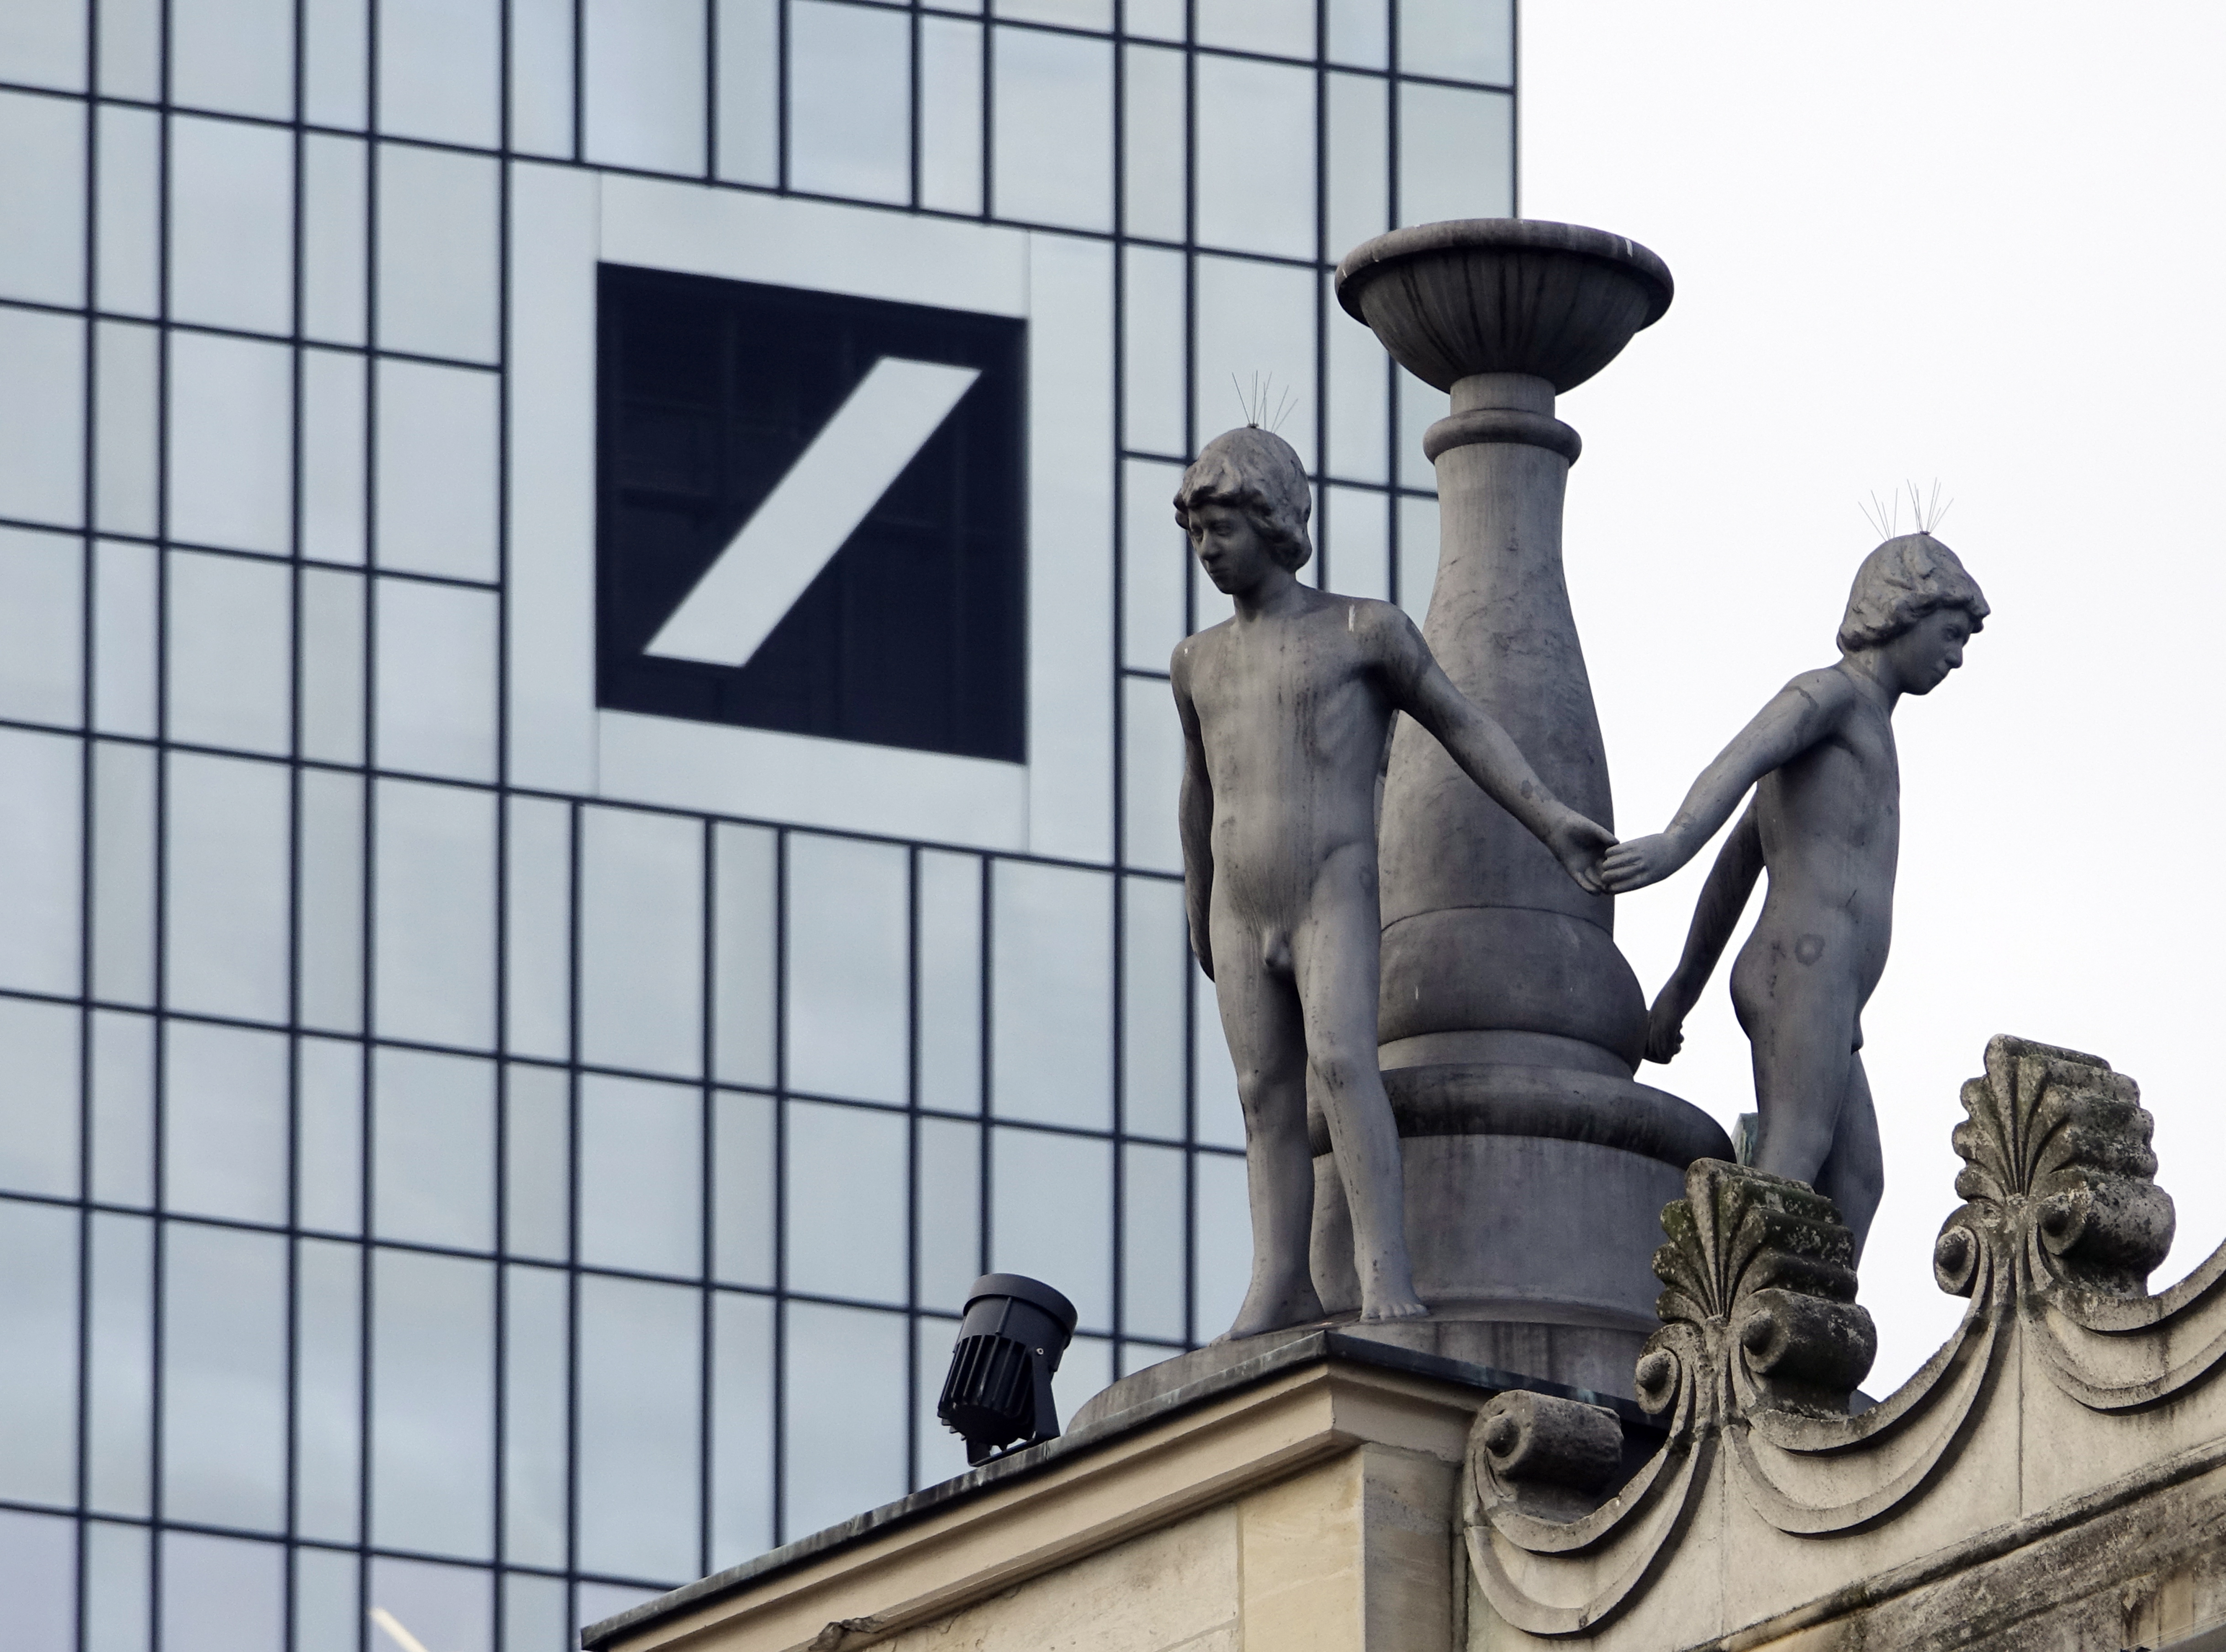 epa07209486 Figures of a statue ensemble at the roof of the Old Opera building in Frankfurt, with the Deutsche Bank building and signage on background, Frankfurt, Germany, 05 December 2018. Reports on 05 December state Deutsche Bank shares fell below 8 euros, a drop of 2.4 per cent, amid criminal investigations into possible money laundering. It is only the second time Deutsche Bank's shares have fallen below 8 euros. The bank offices were raided by police 29-30 November, causing the bank shares to slip below 8 euros lever for the first time.  EPA/MAURITZ ANTIN